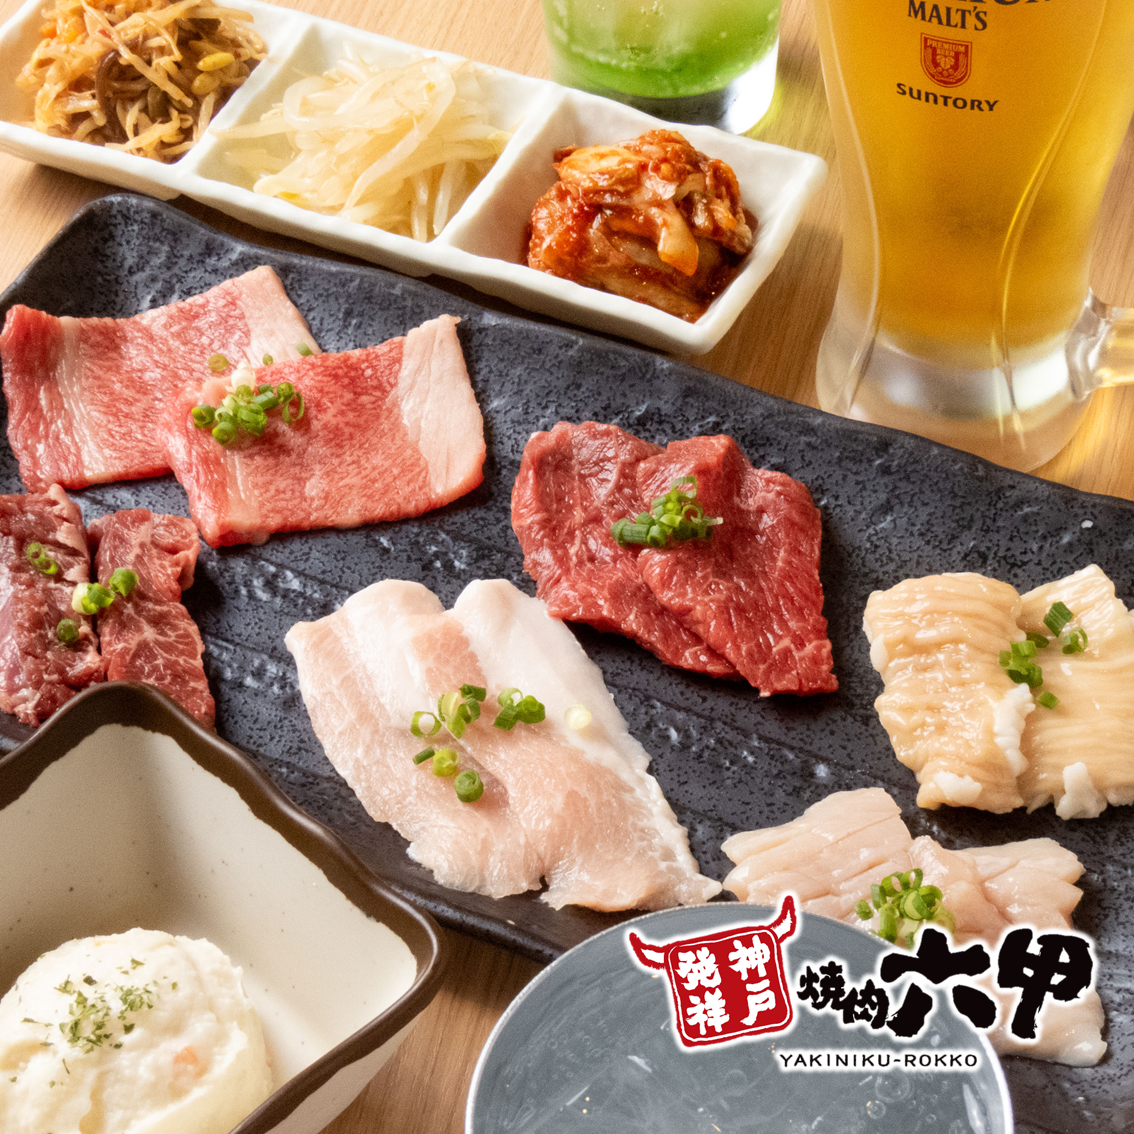 Open from 11:30 ♪ Not only all-you-can-eat, but also a wide variety of lunch menus are available ♪